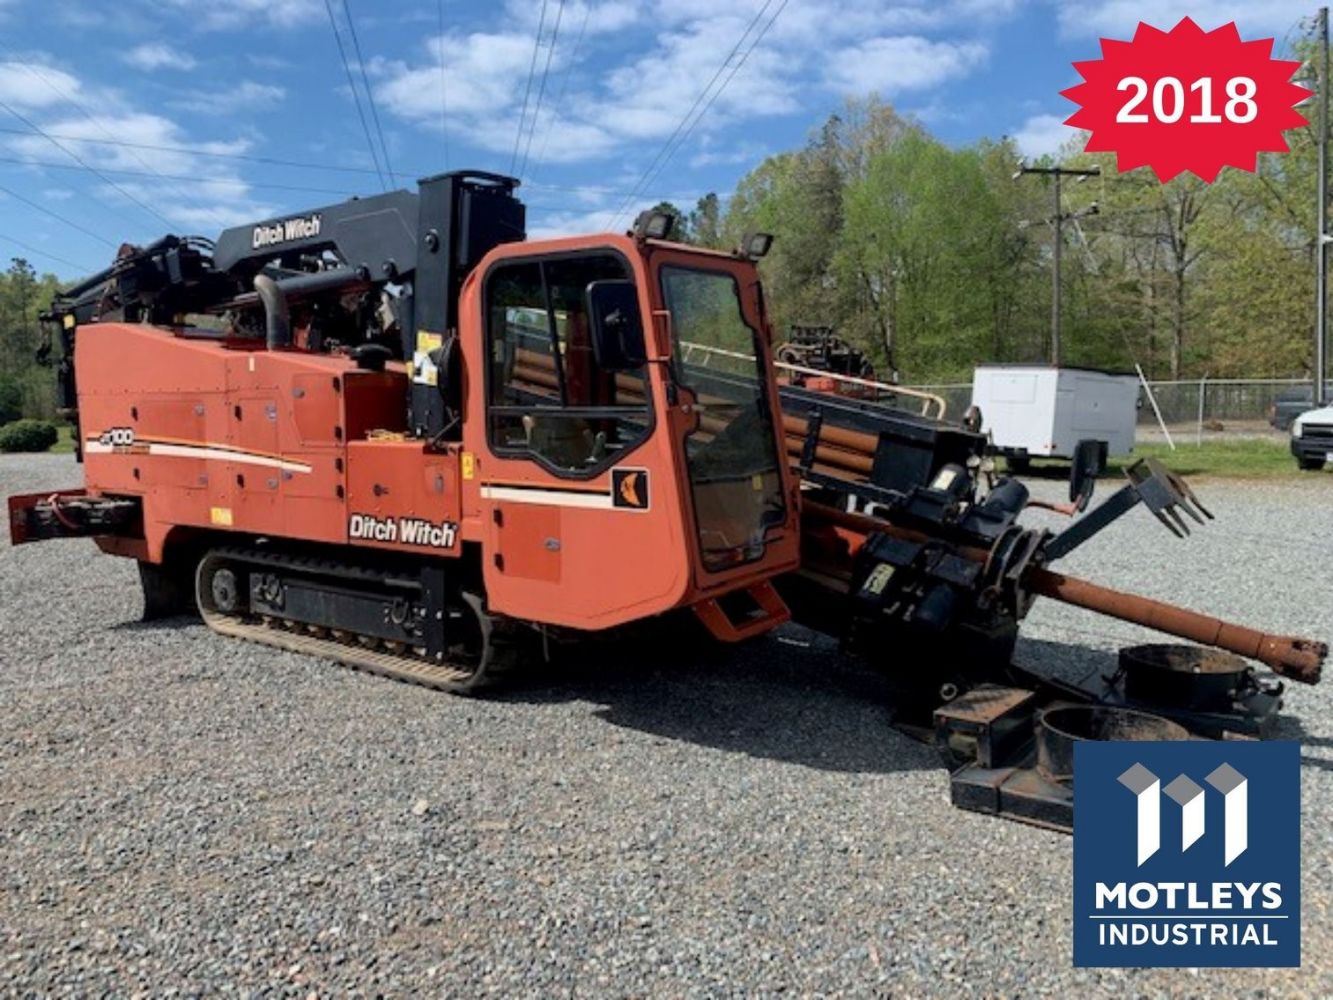 2 Day Utility Equipment Public Auction For Woodlawn Construction Inc. | Day 1 of 2 | Live & Online | Glen Allen, VA